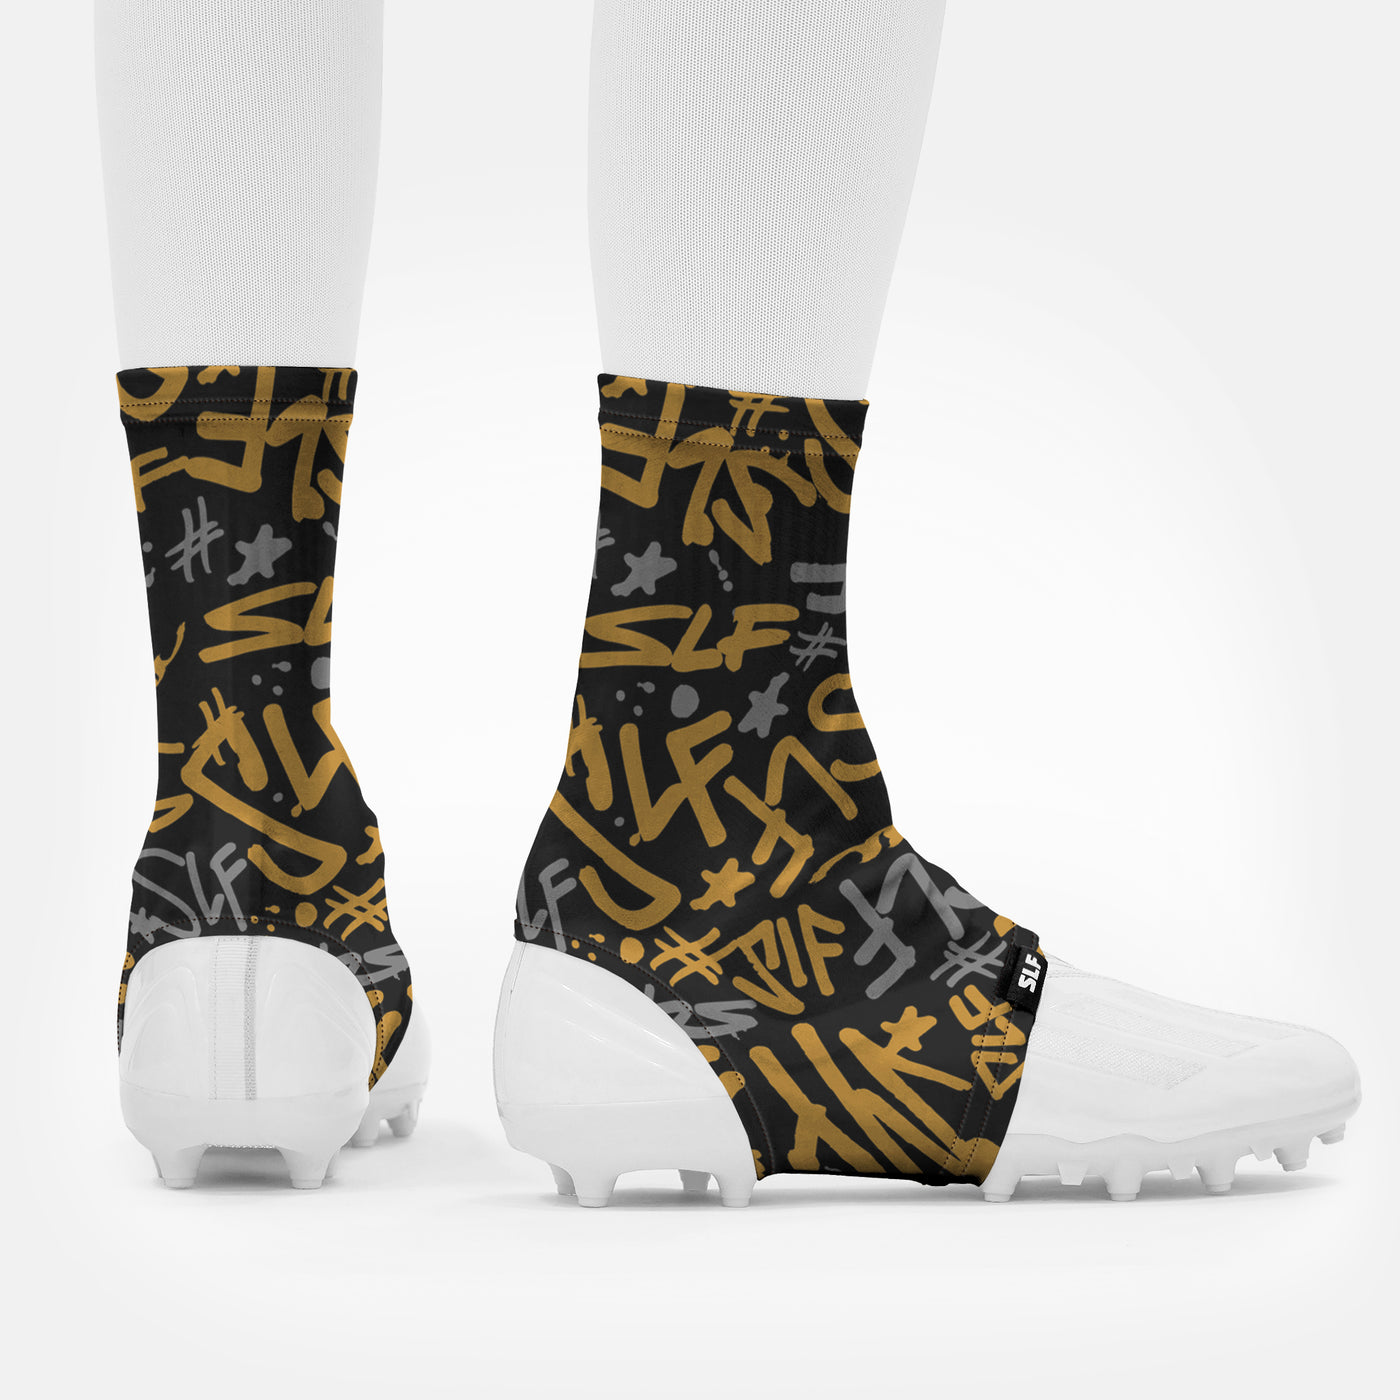 SLF Pattern Black Gold Spats / Cleat Covers